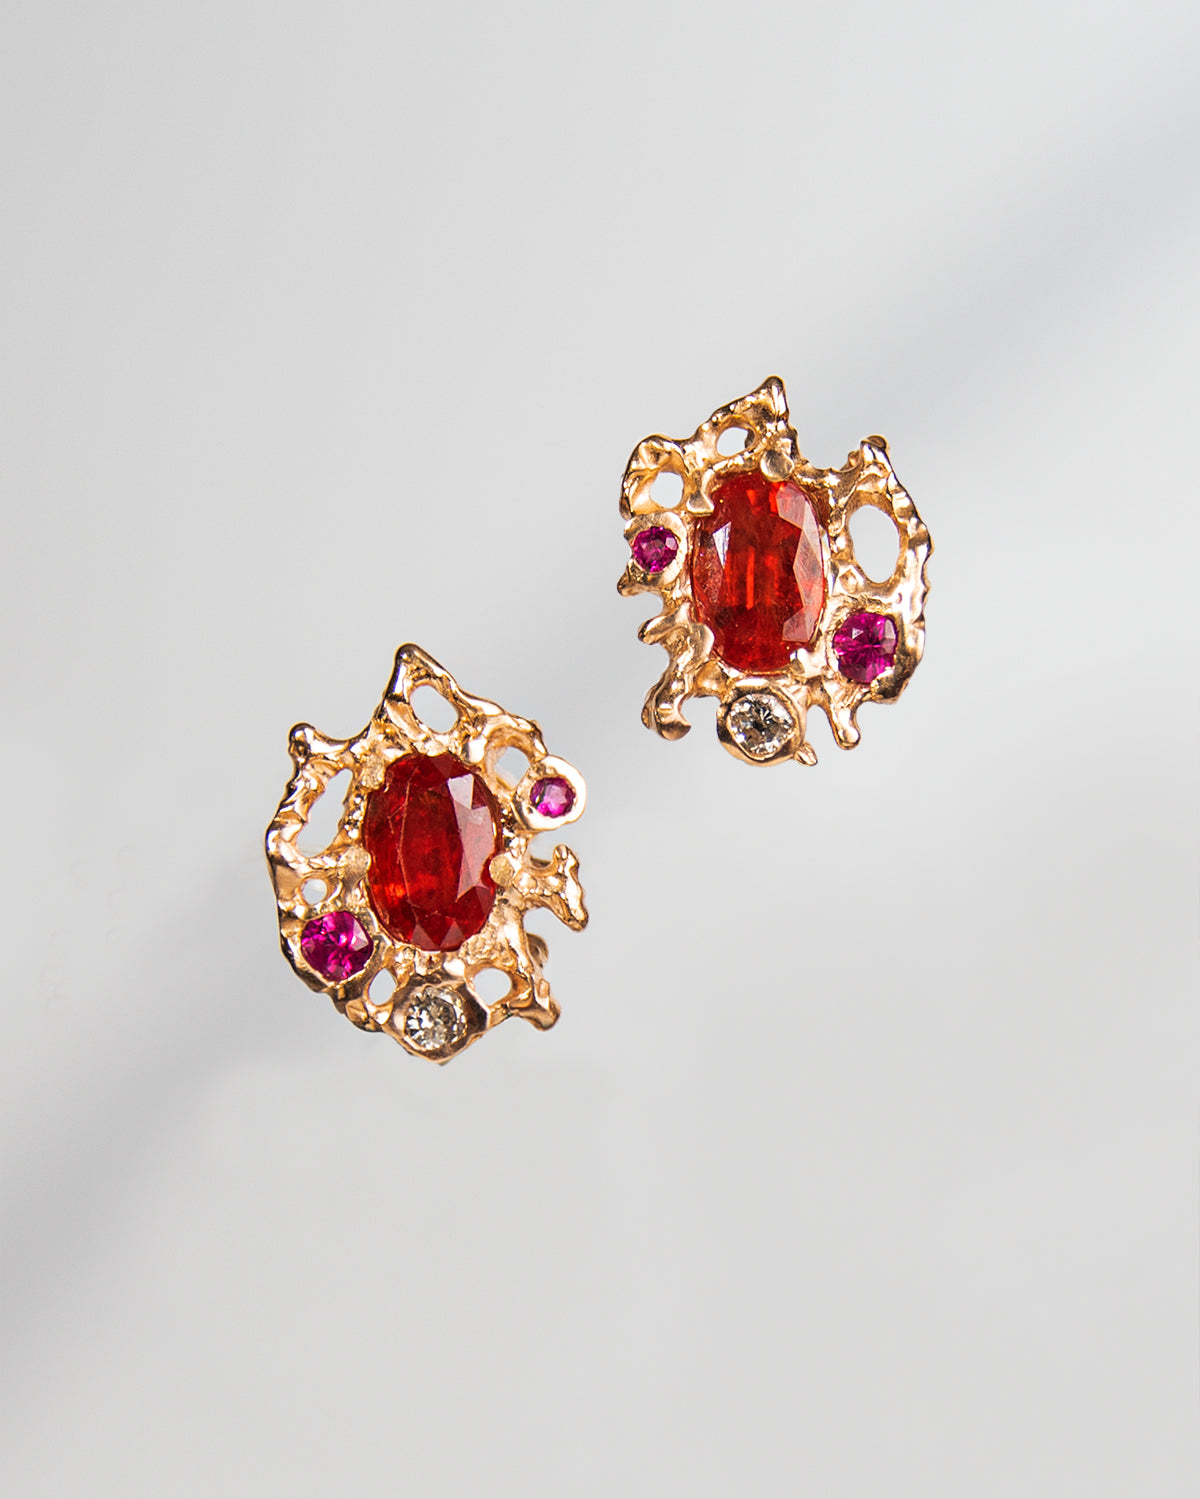 Lava earring studs crafted from 18K Rose Gold set with Orange Sapphire, Ruby, and Diamond